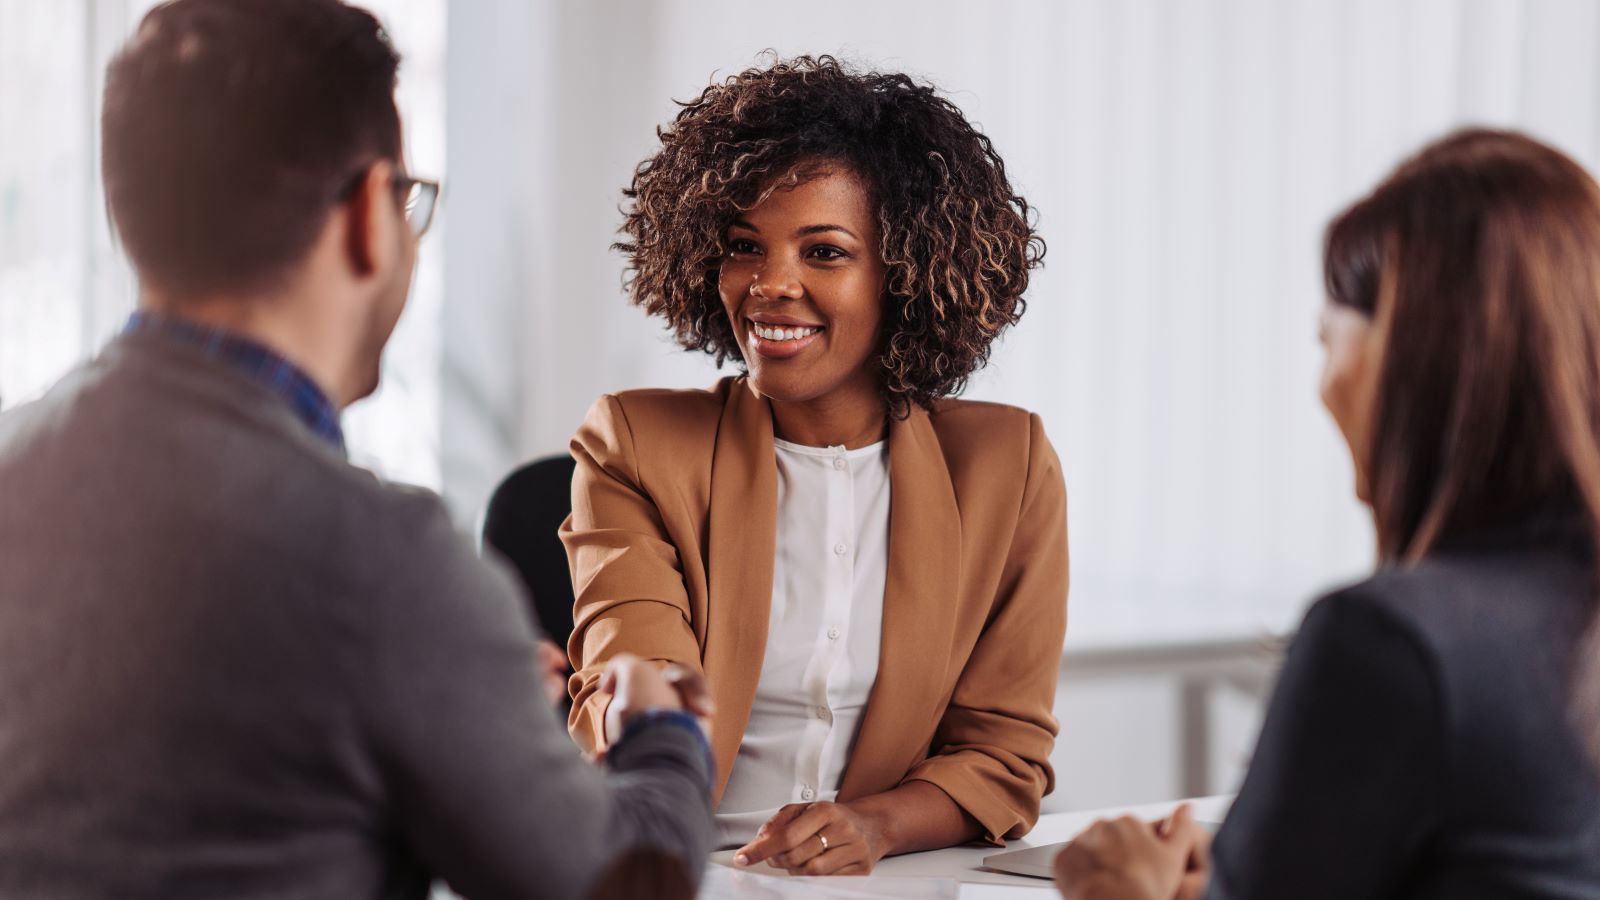 6 Ways to Prepare for Behavioural Interview Questions